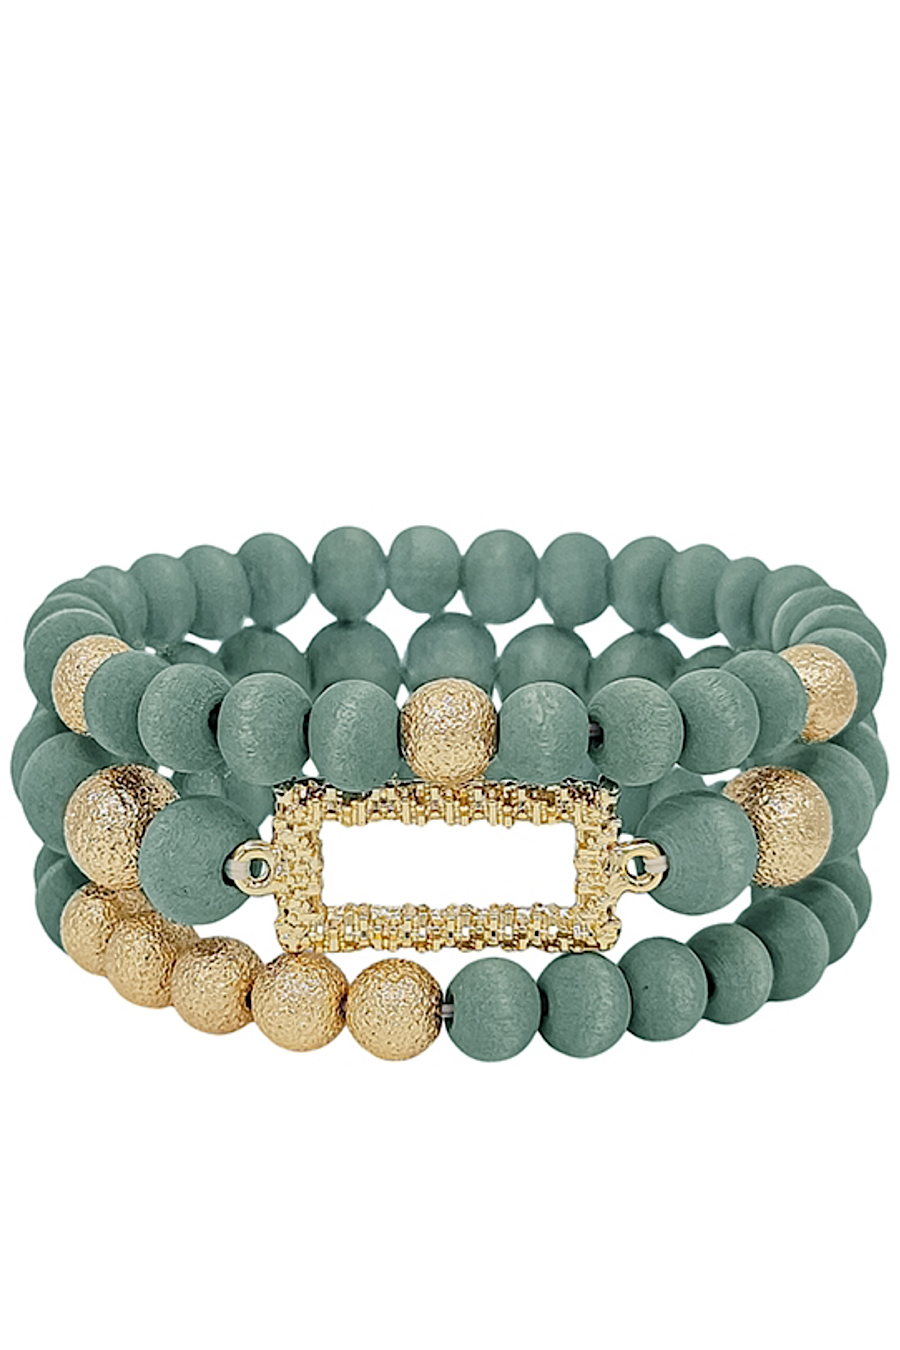 3pc Textured Gold Beaded Bracelet Set in Mint or Pink